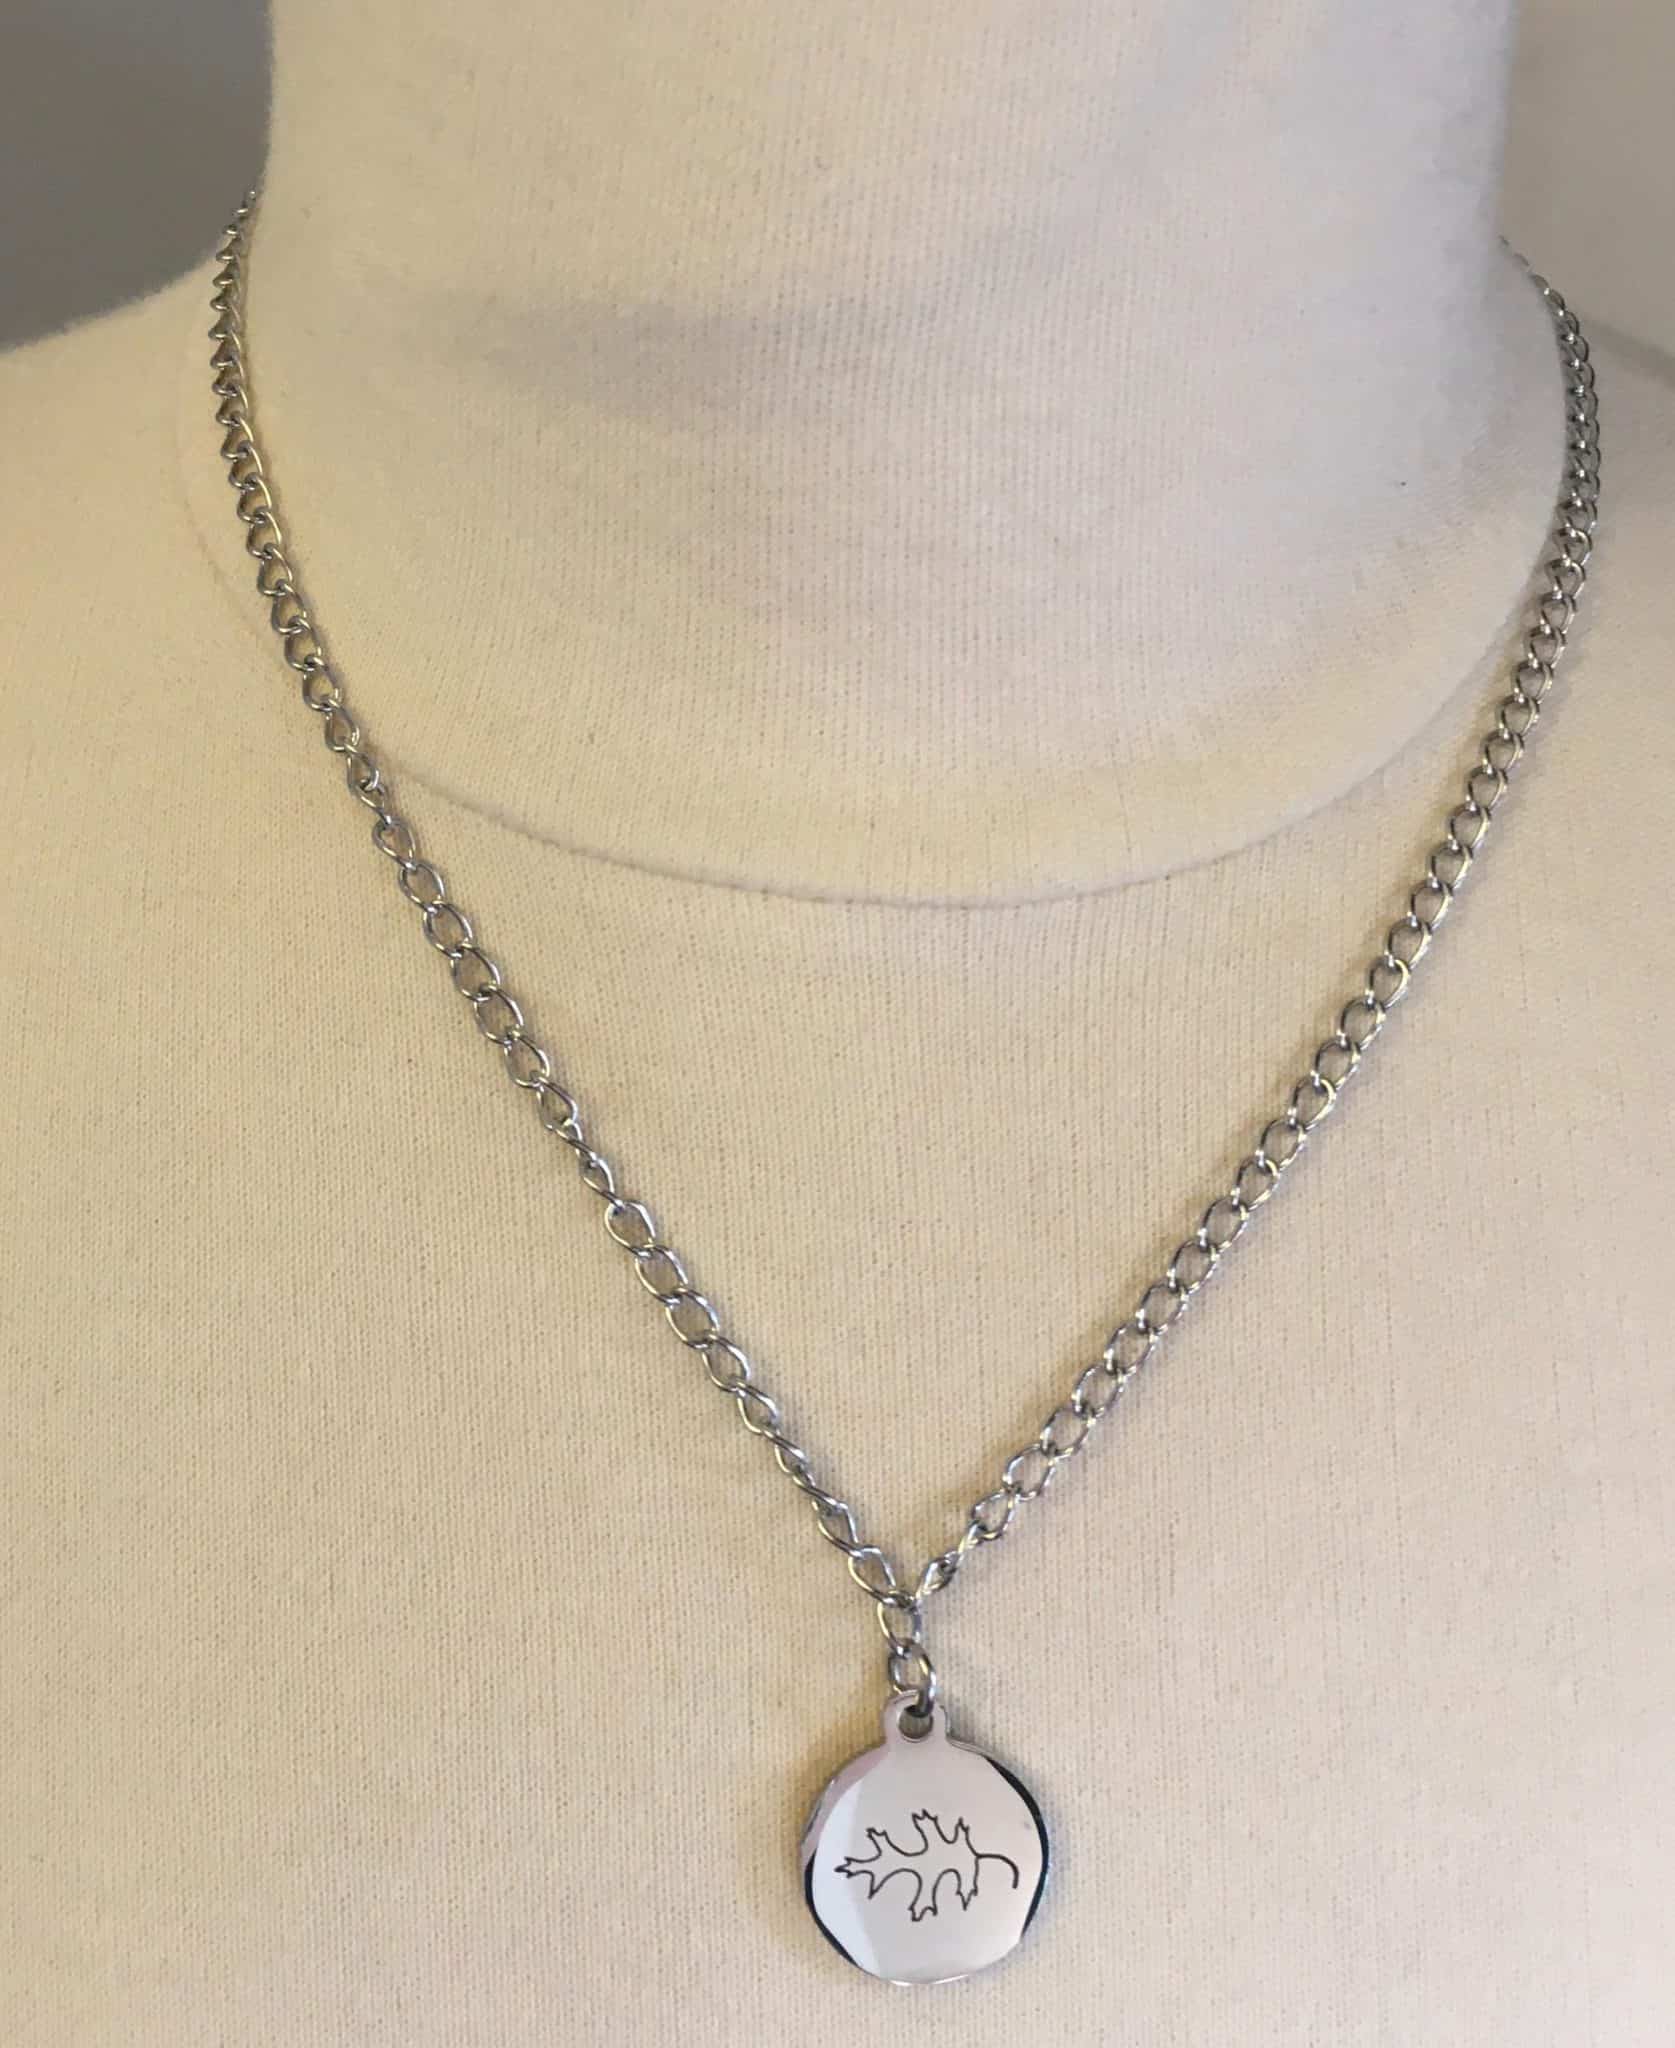 Necklace with Thoreau Sketch | The Walden Woods Project